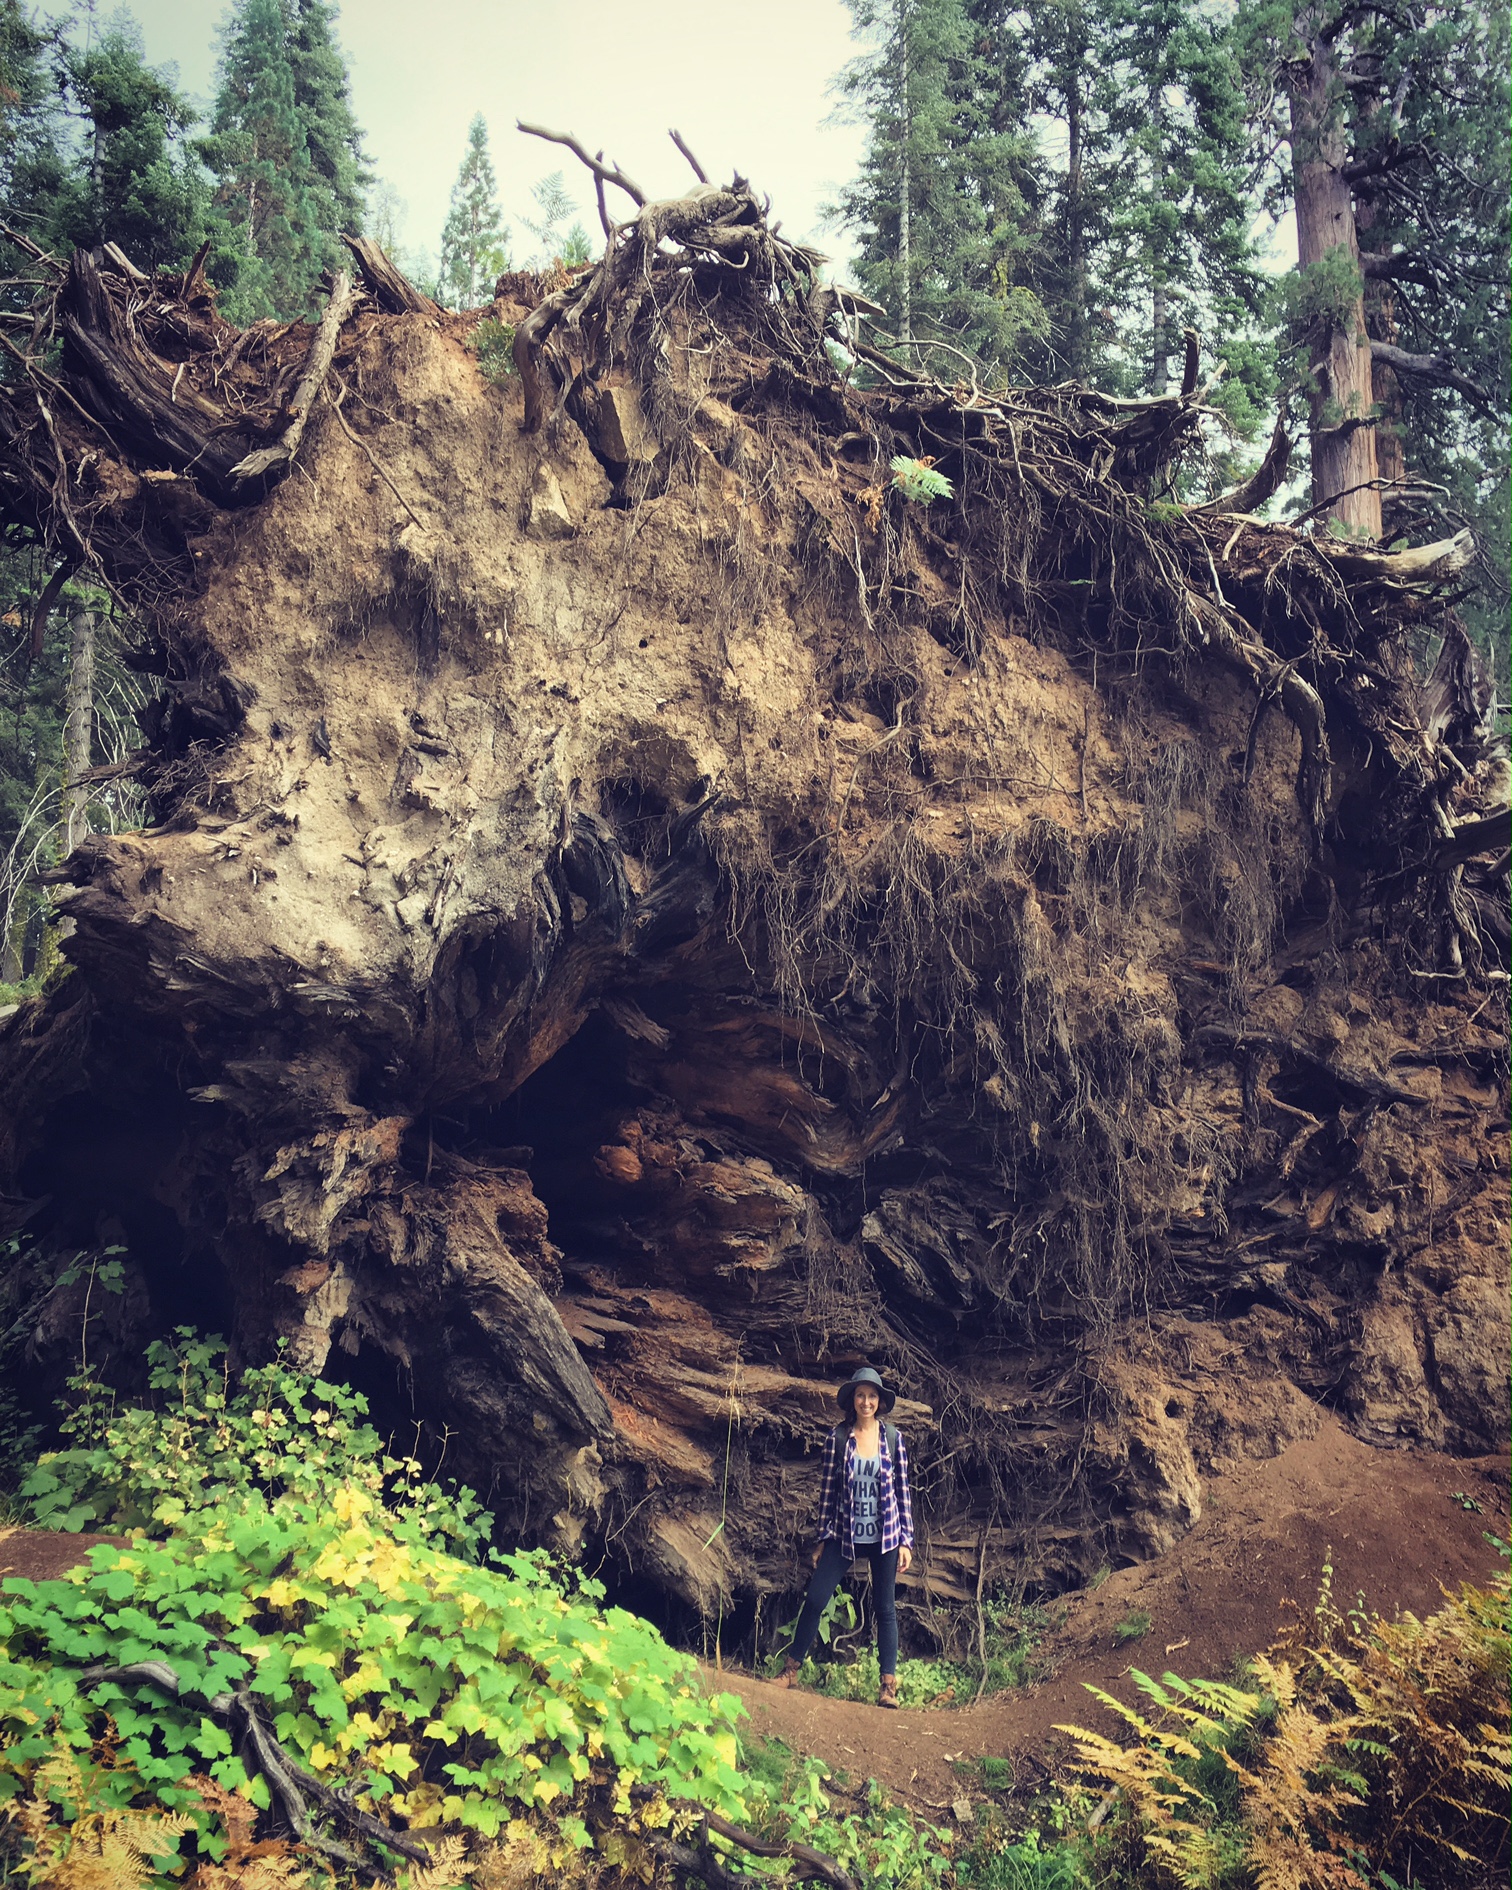 Standing at the root of a Sequoia tree